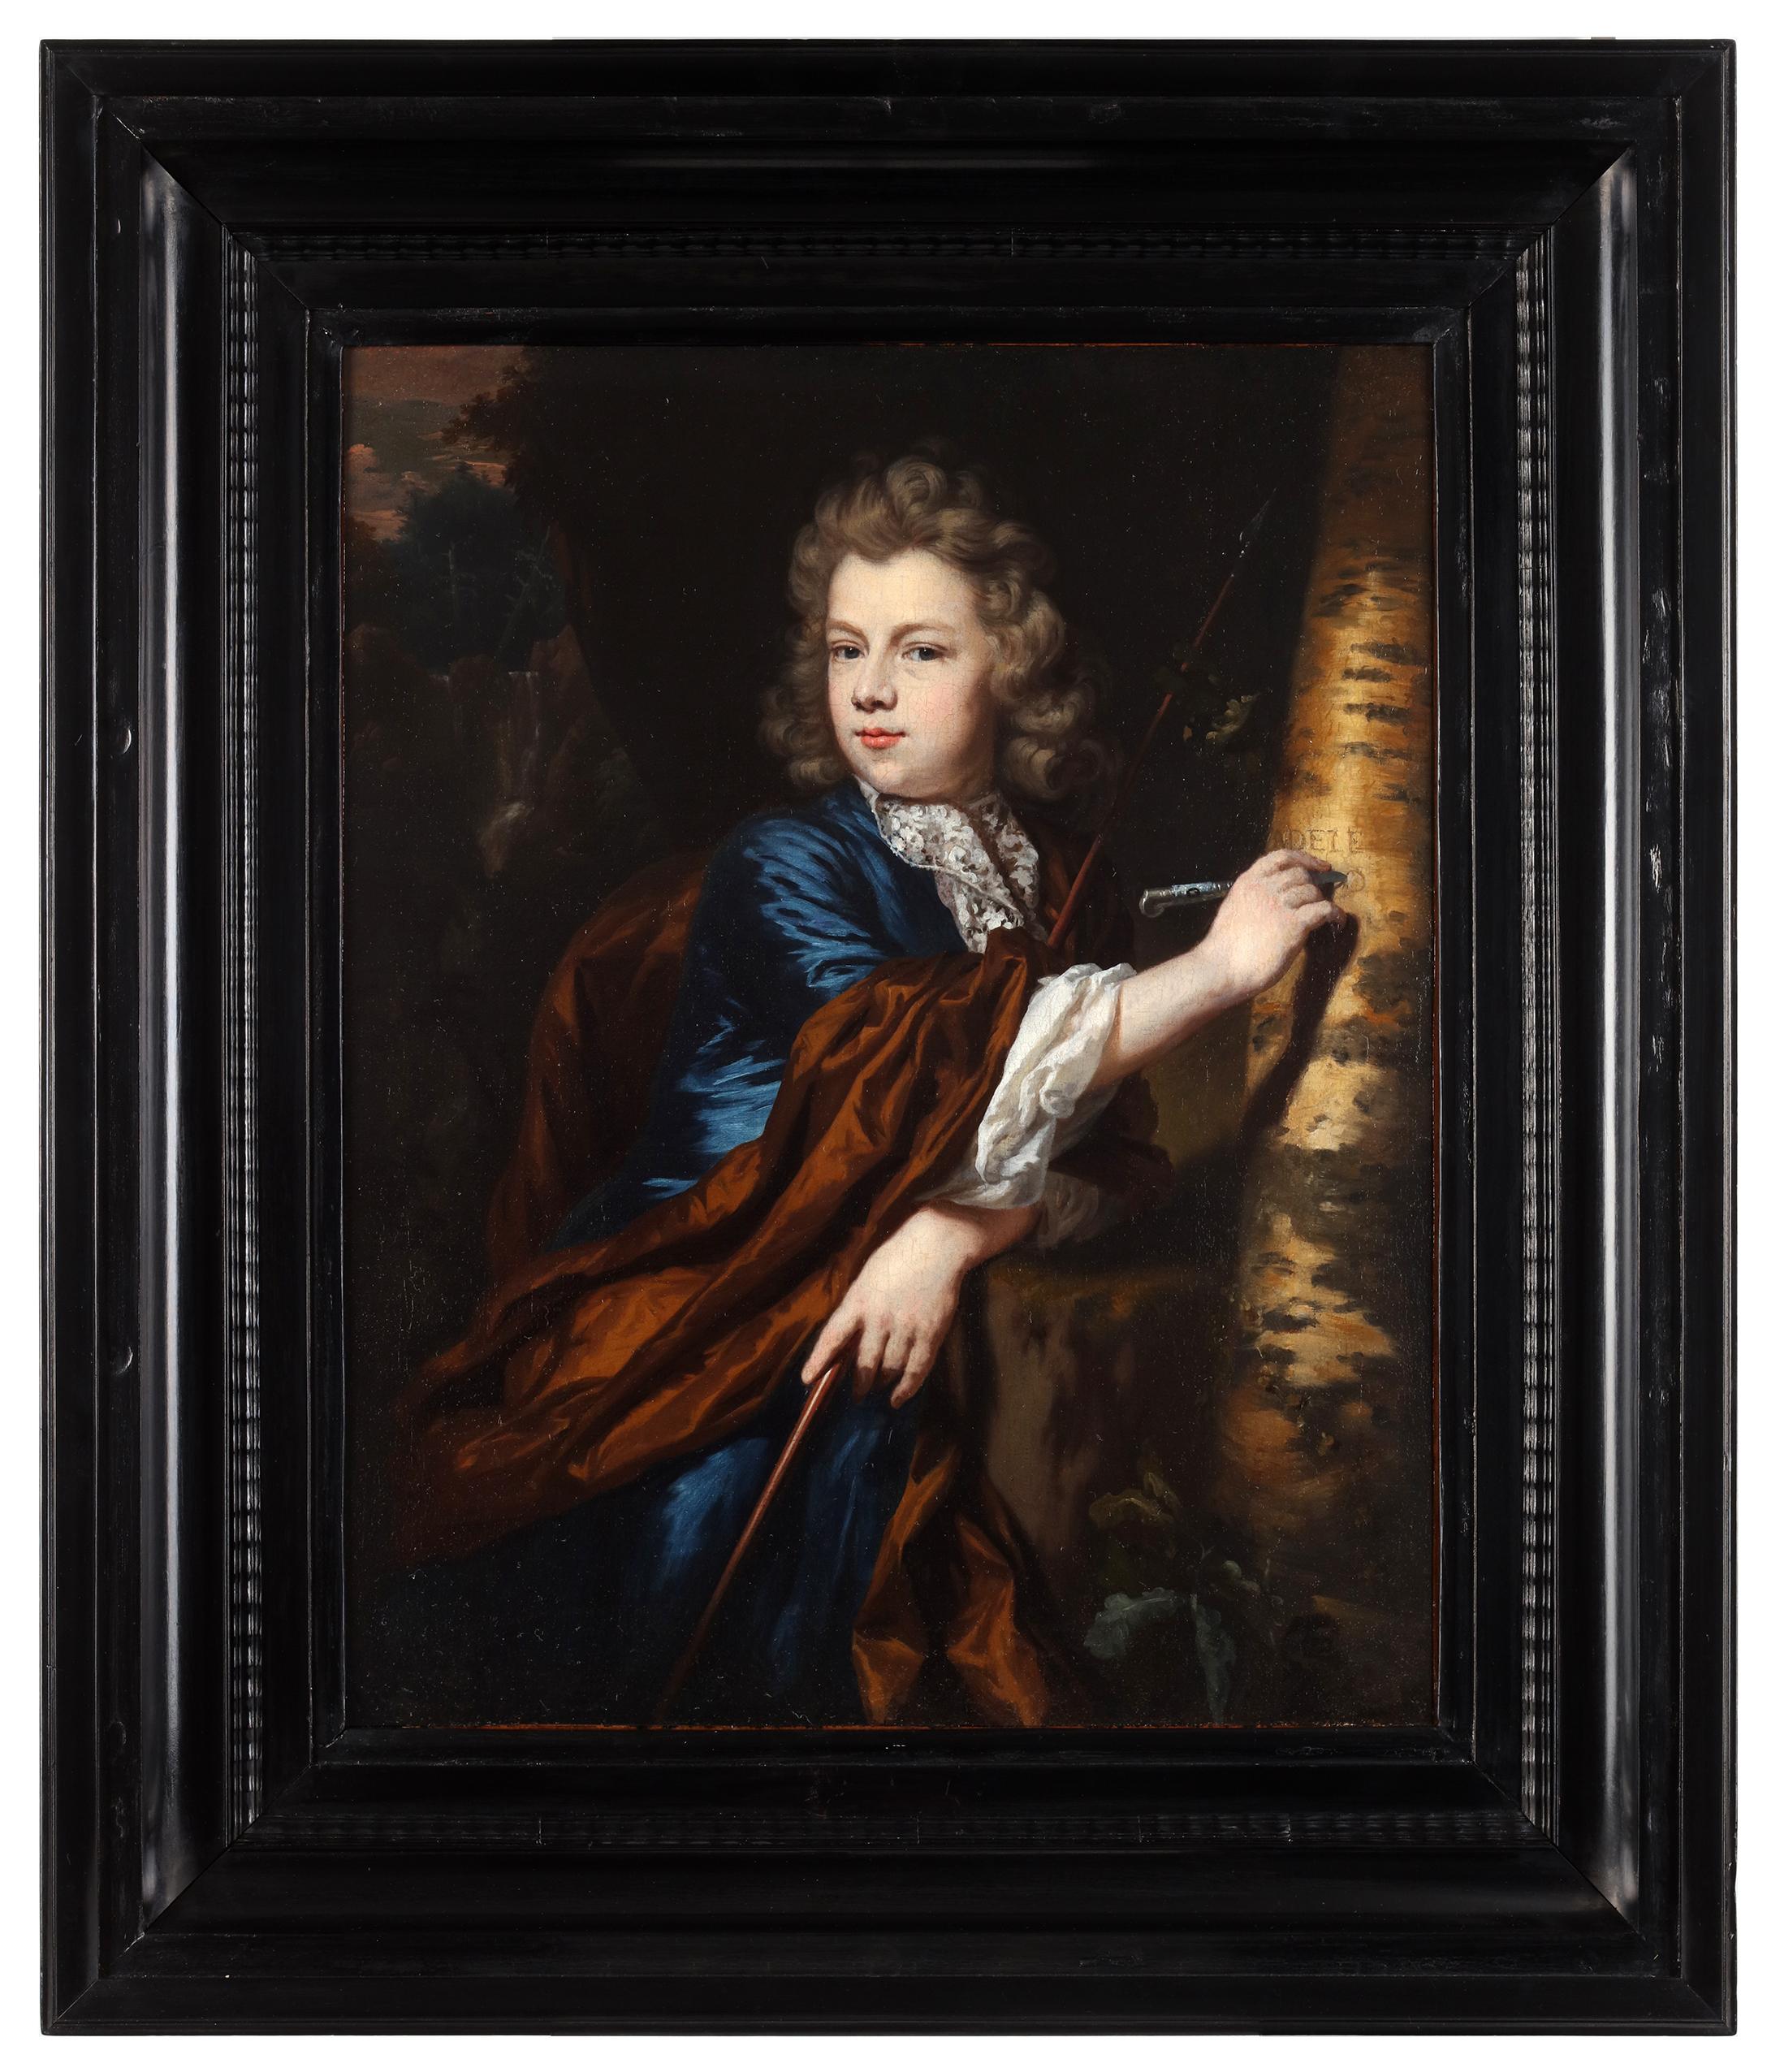 A portrait of a young boy and Johanna van den Brande - Nicholas Maes  - Painting by Nicolas Maes 